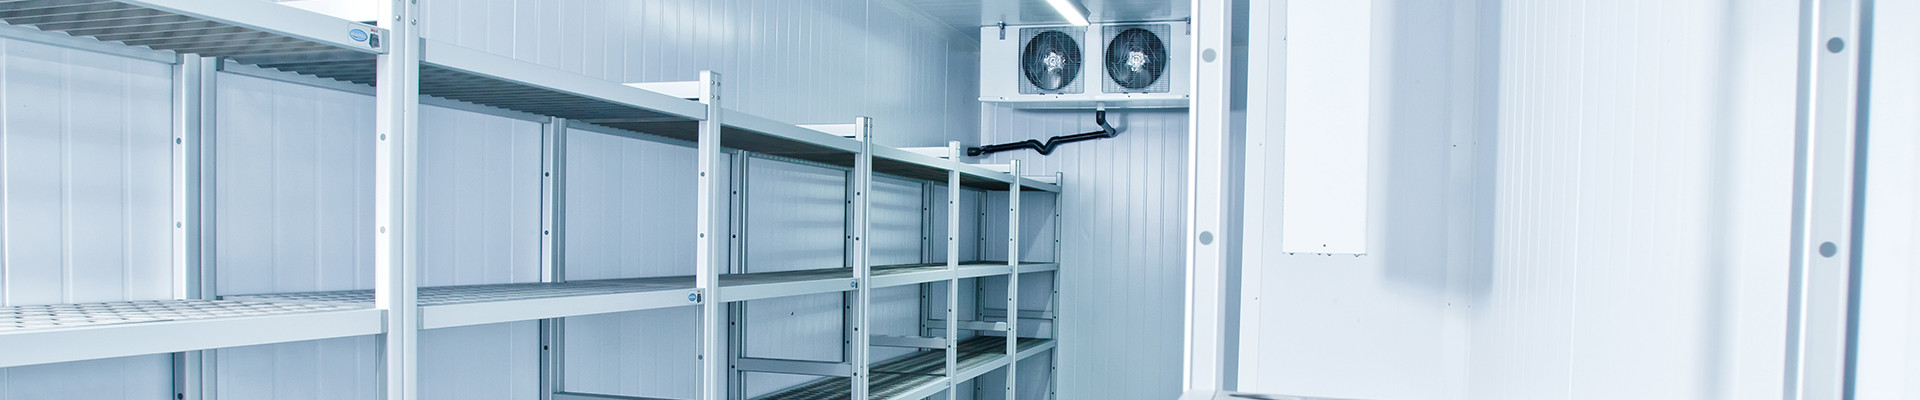 Cooling and Refrigeration